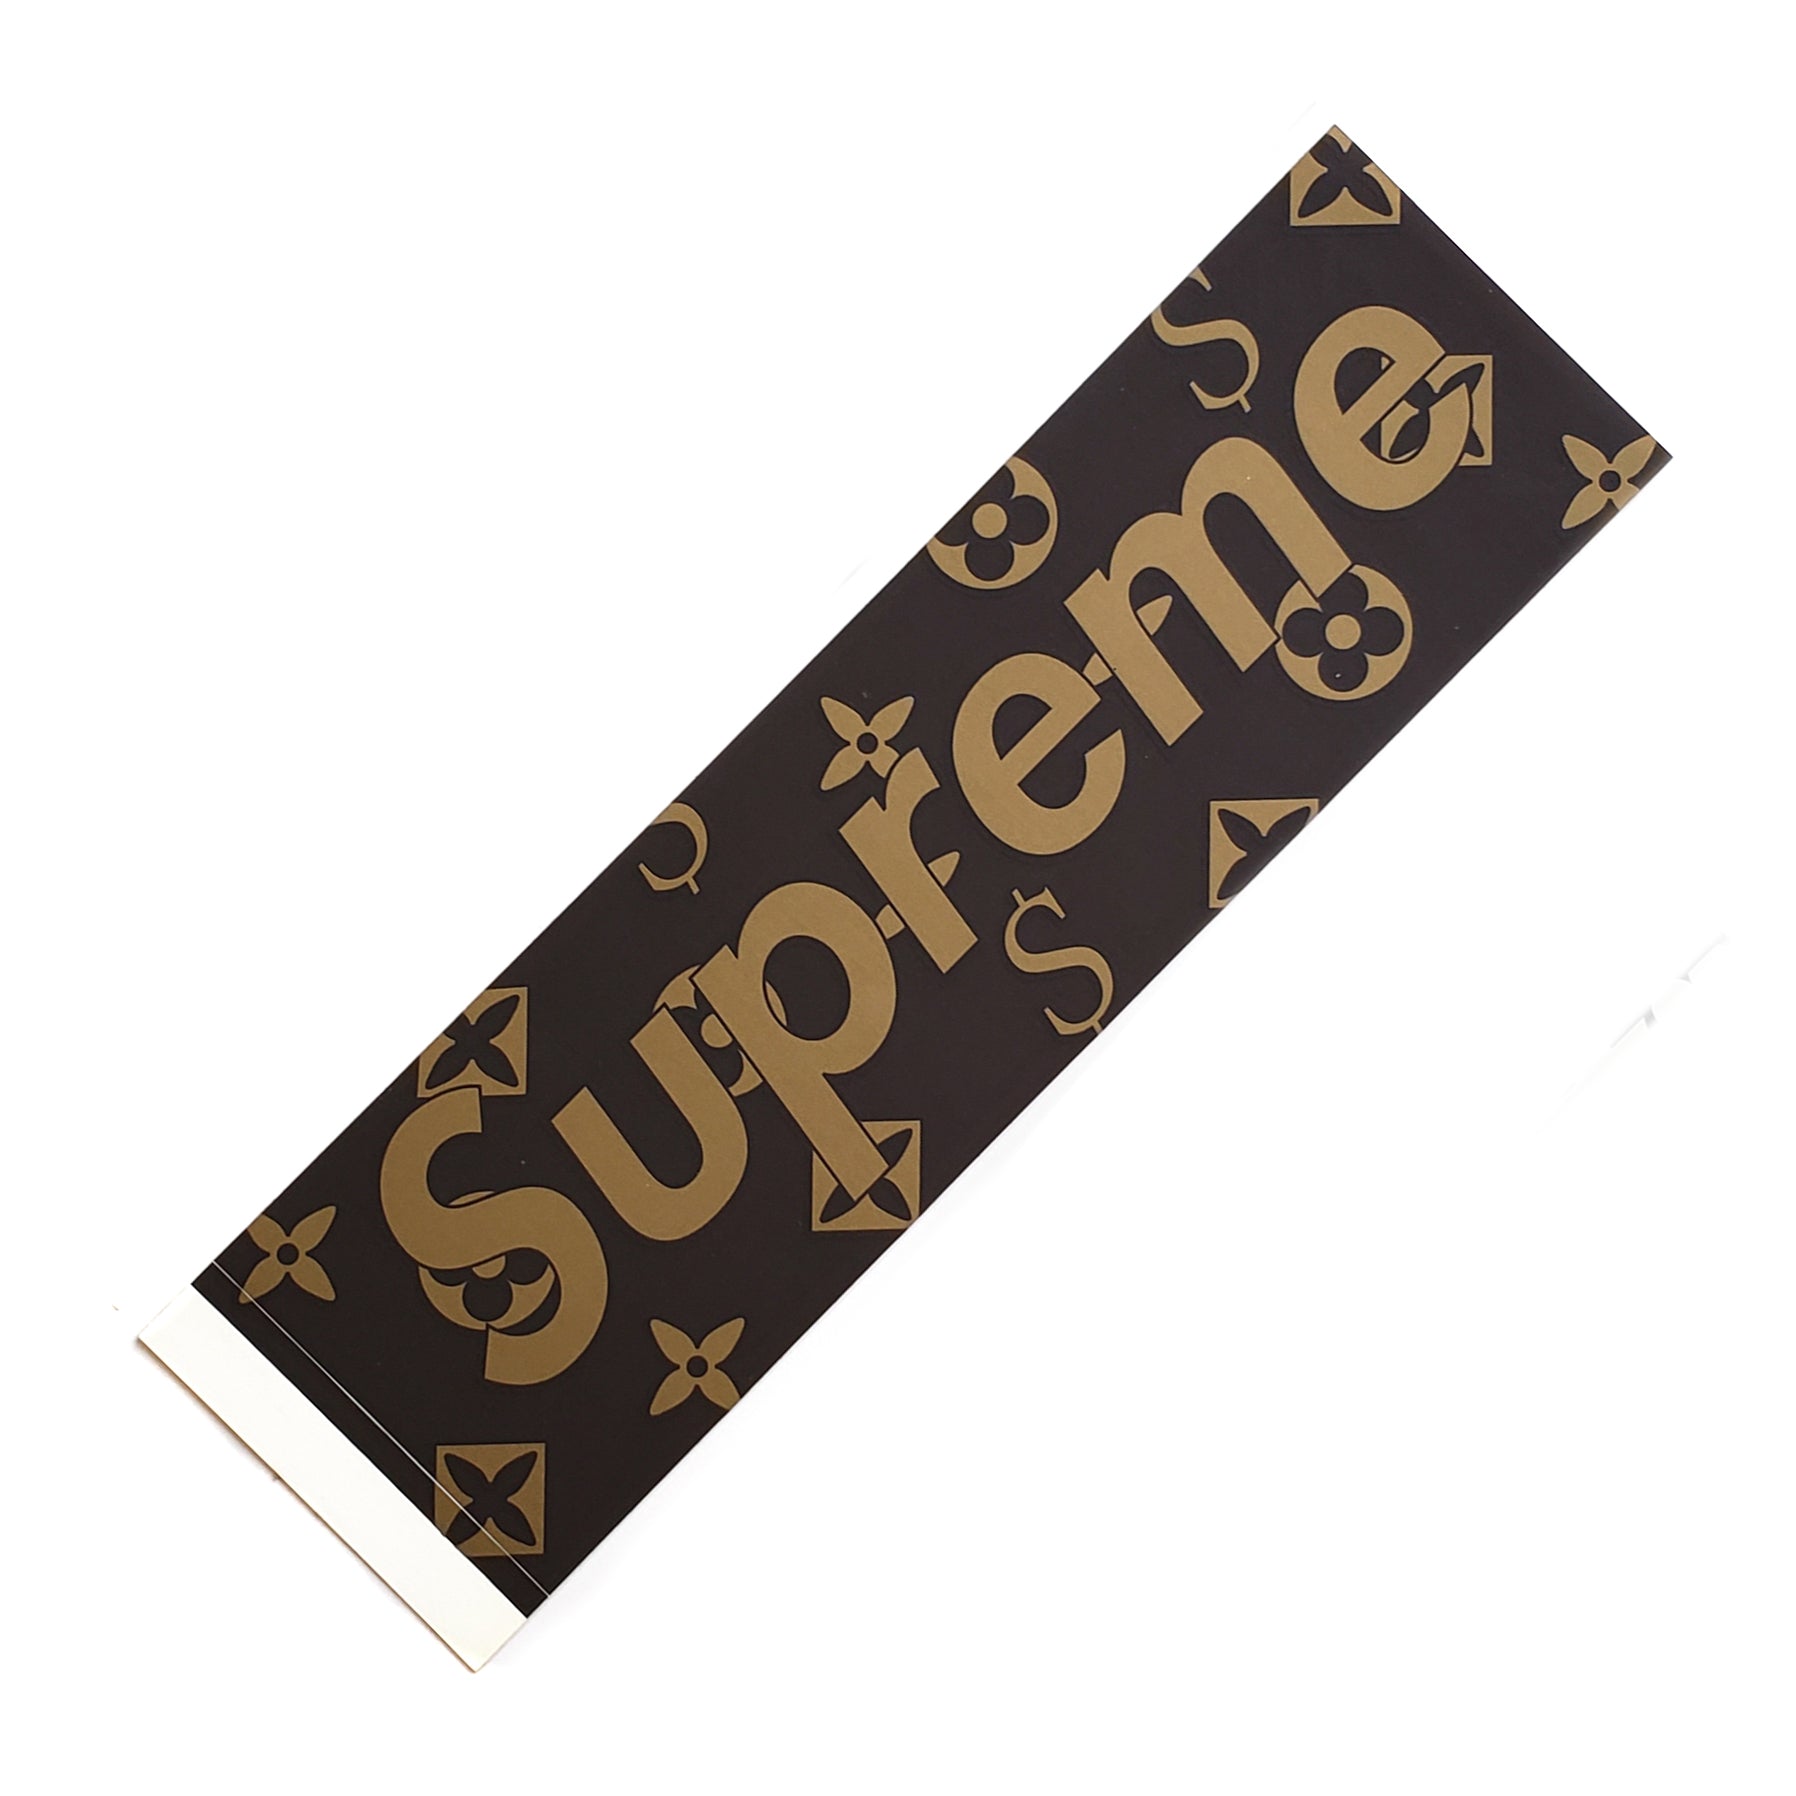 Louis Vuitton X Supreme Box Logo Tee  Size M Available For Immediate Sale  At Sothebys